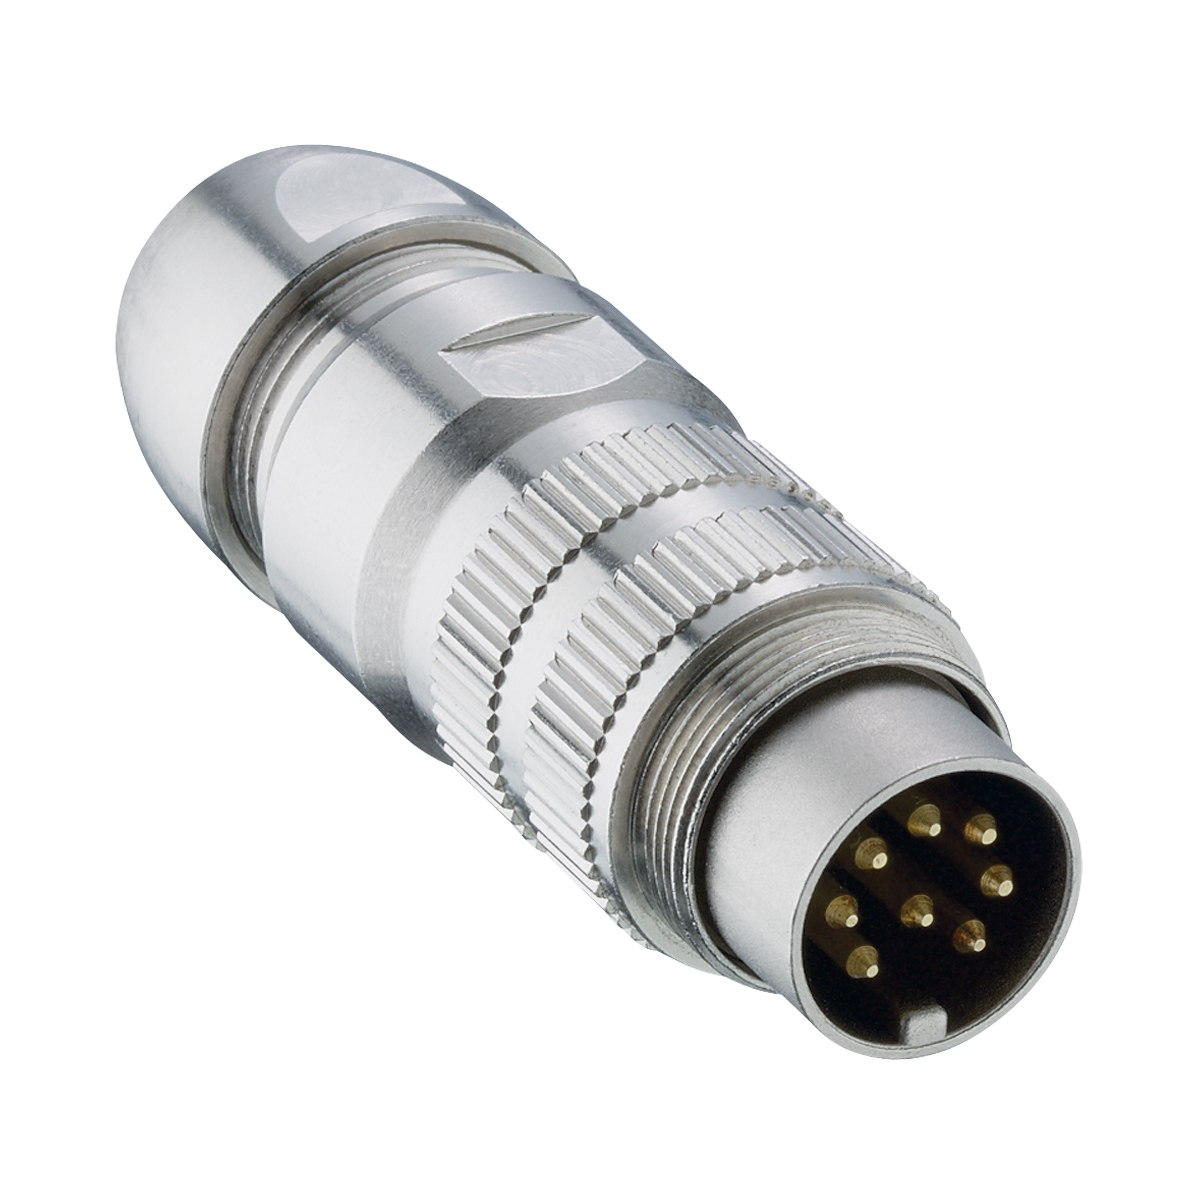 Lumberg: 33200 (Series 03 | Circular connectors with threaded joint M16 acc. to IEC 61076-2-106, IP40/IP68)